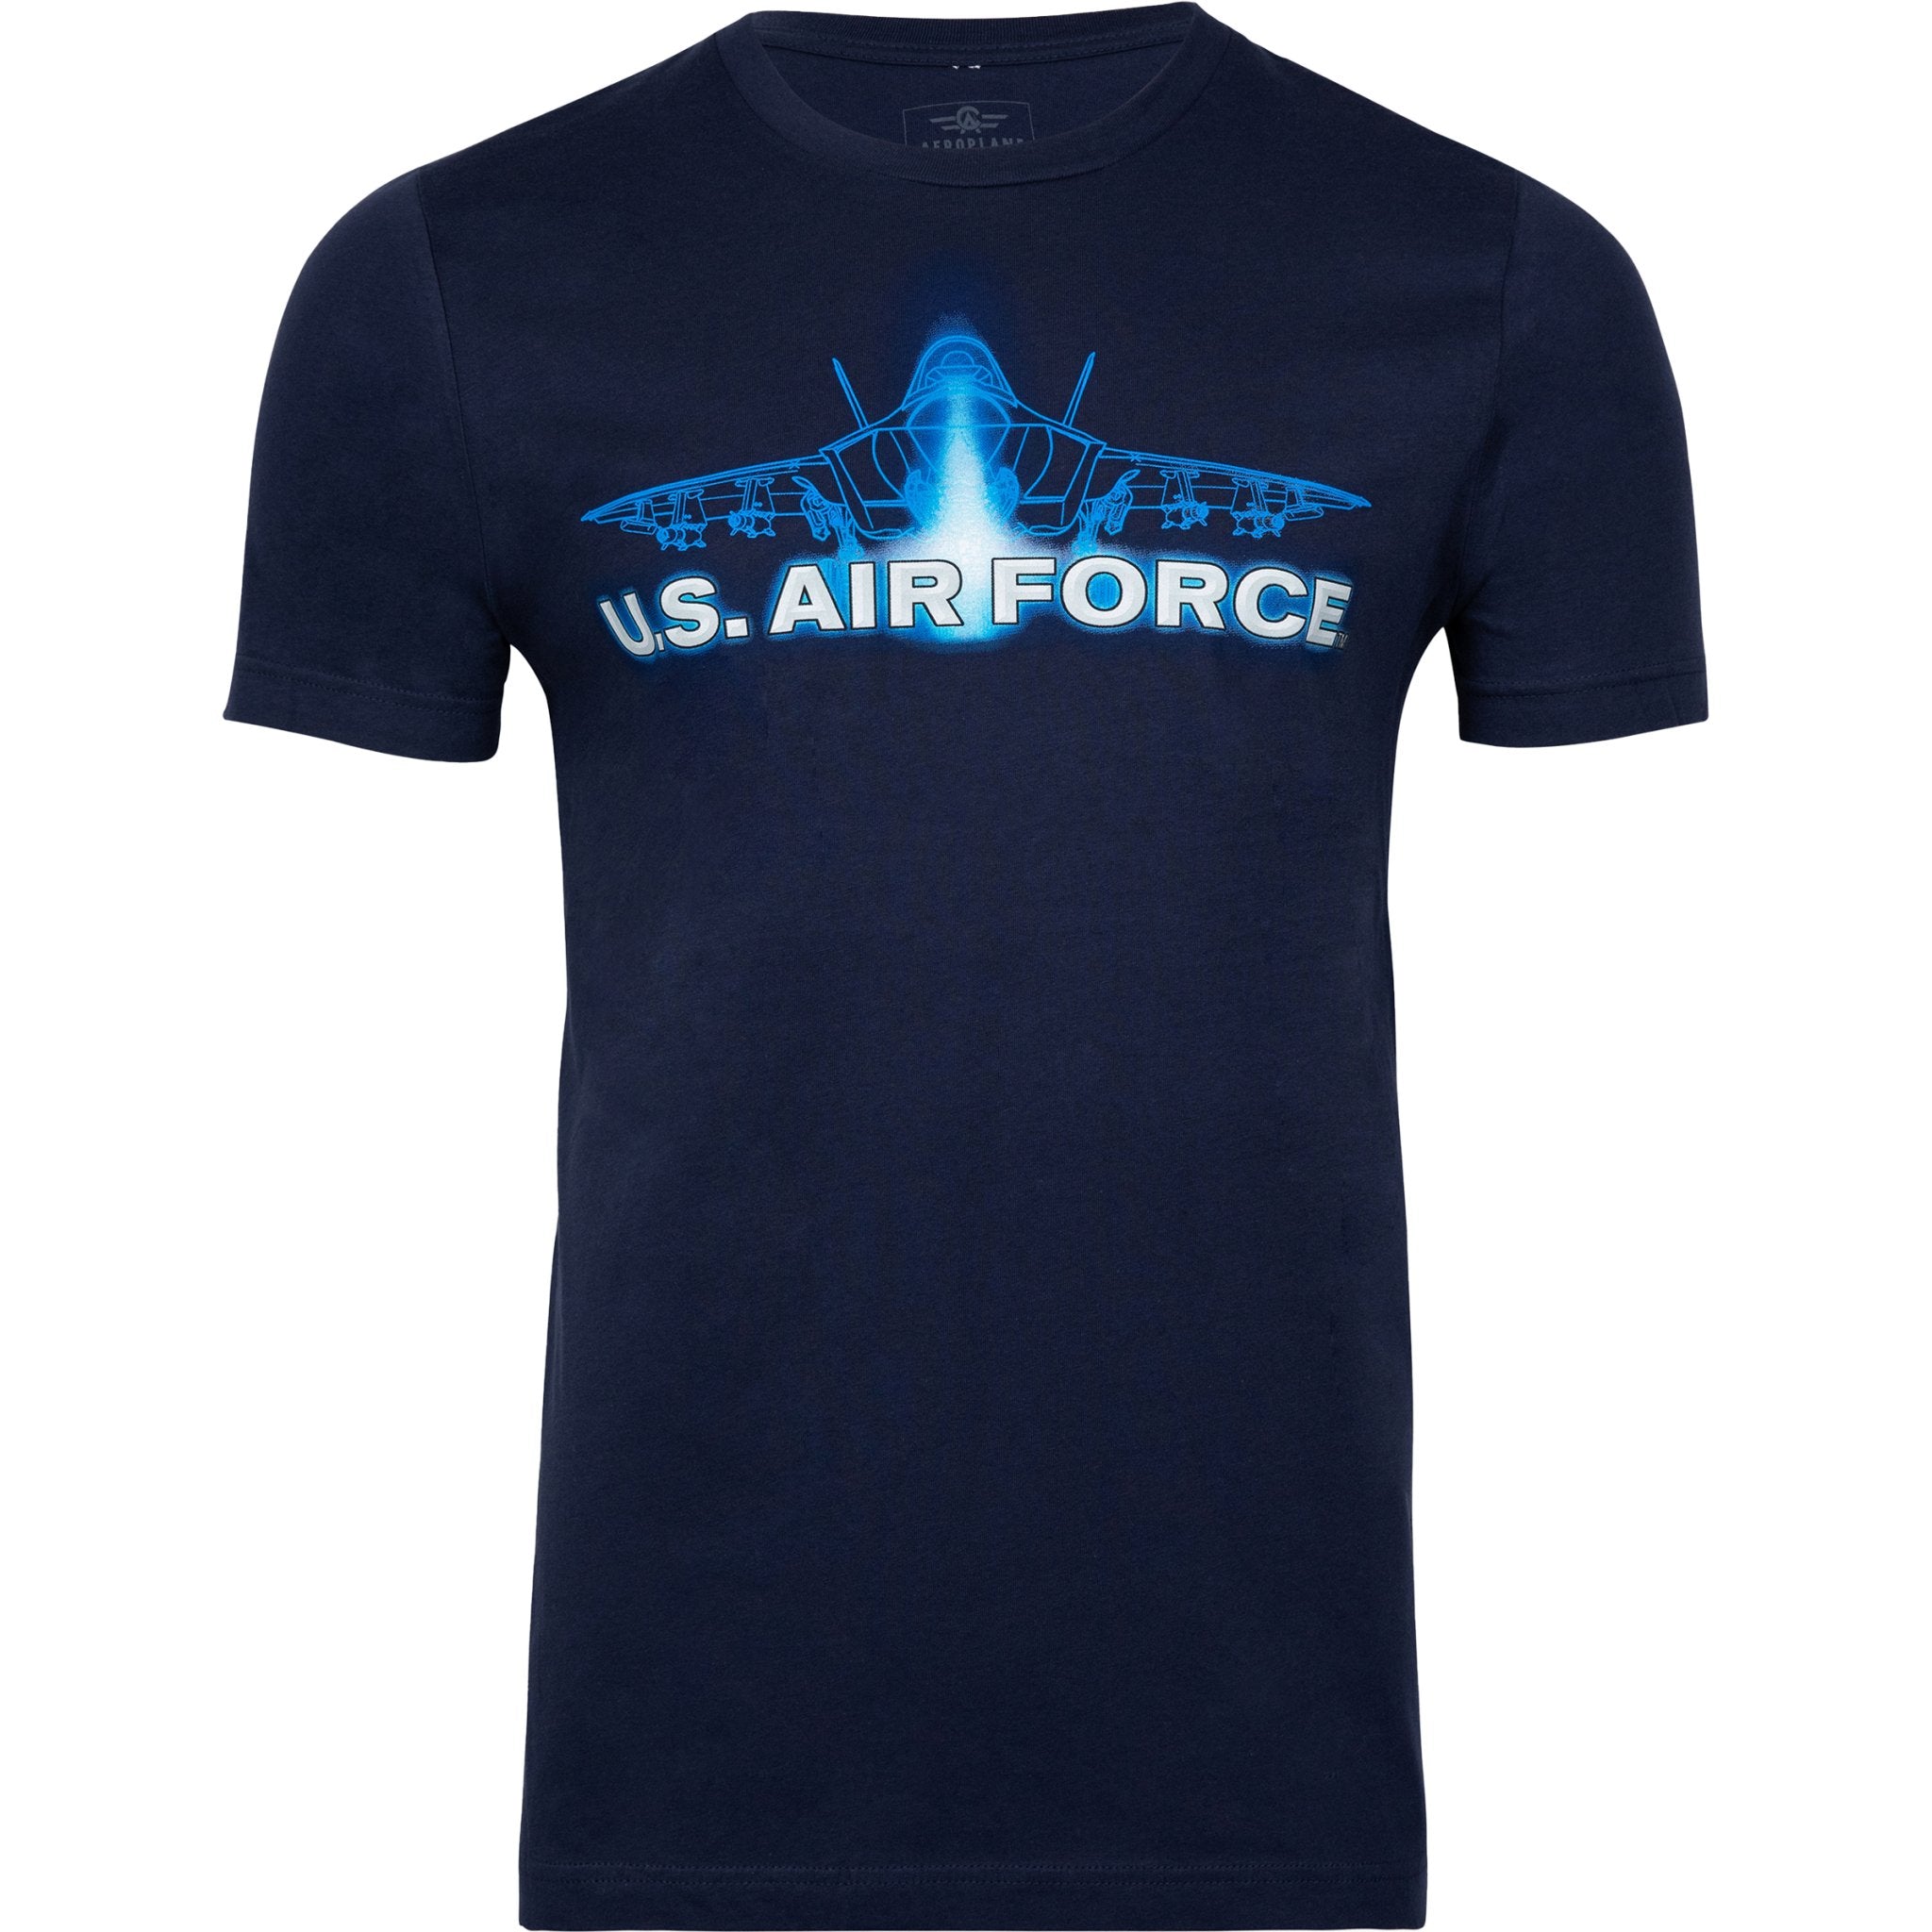 U.S. Air Force F-35 Officially Licensed Aeroplane Apparel Co. Men's T-Shirt - PilotMall.com